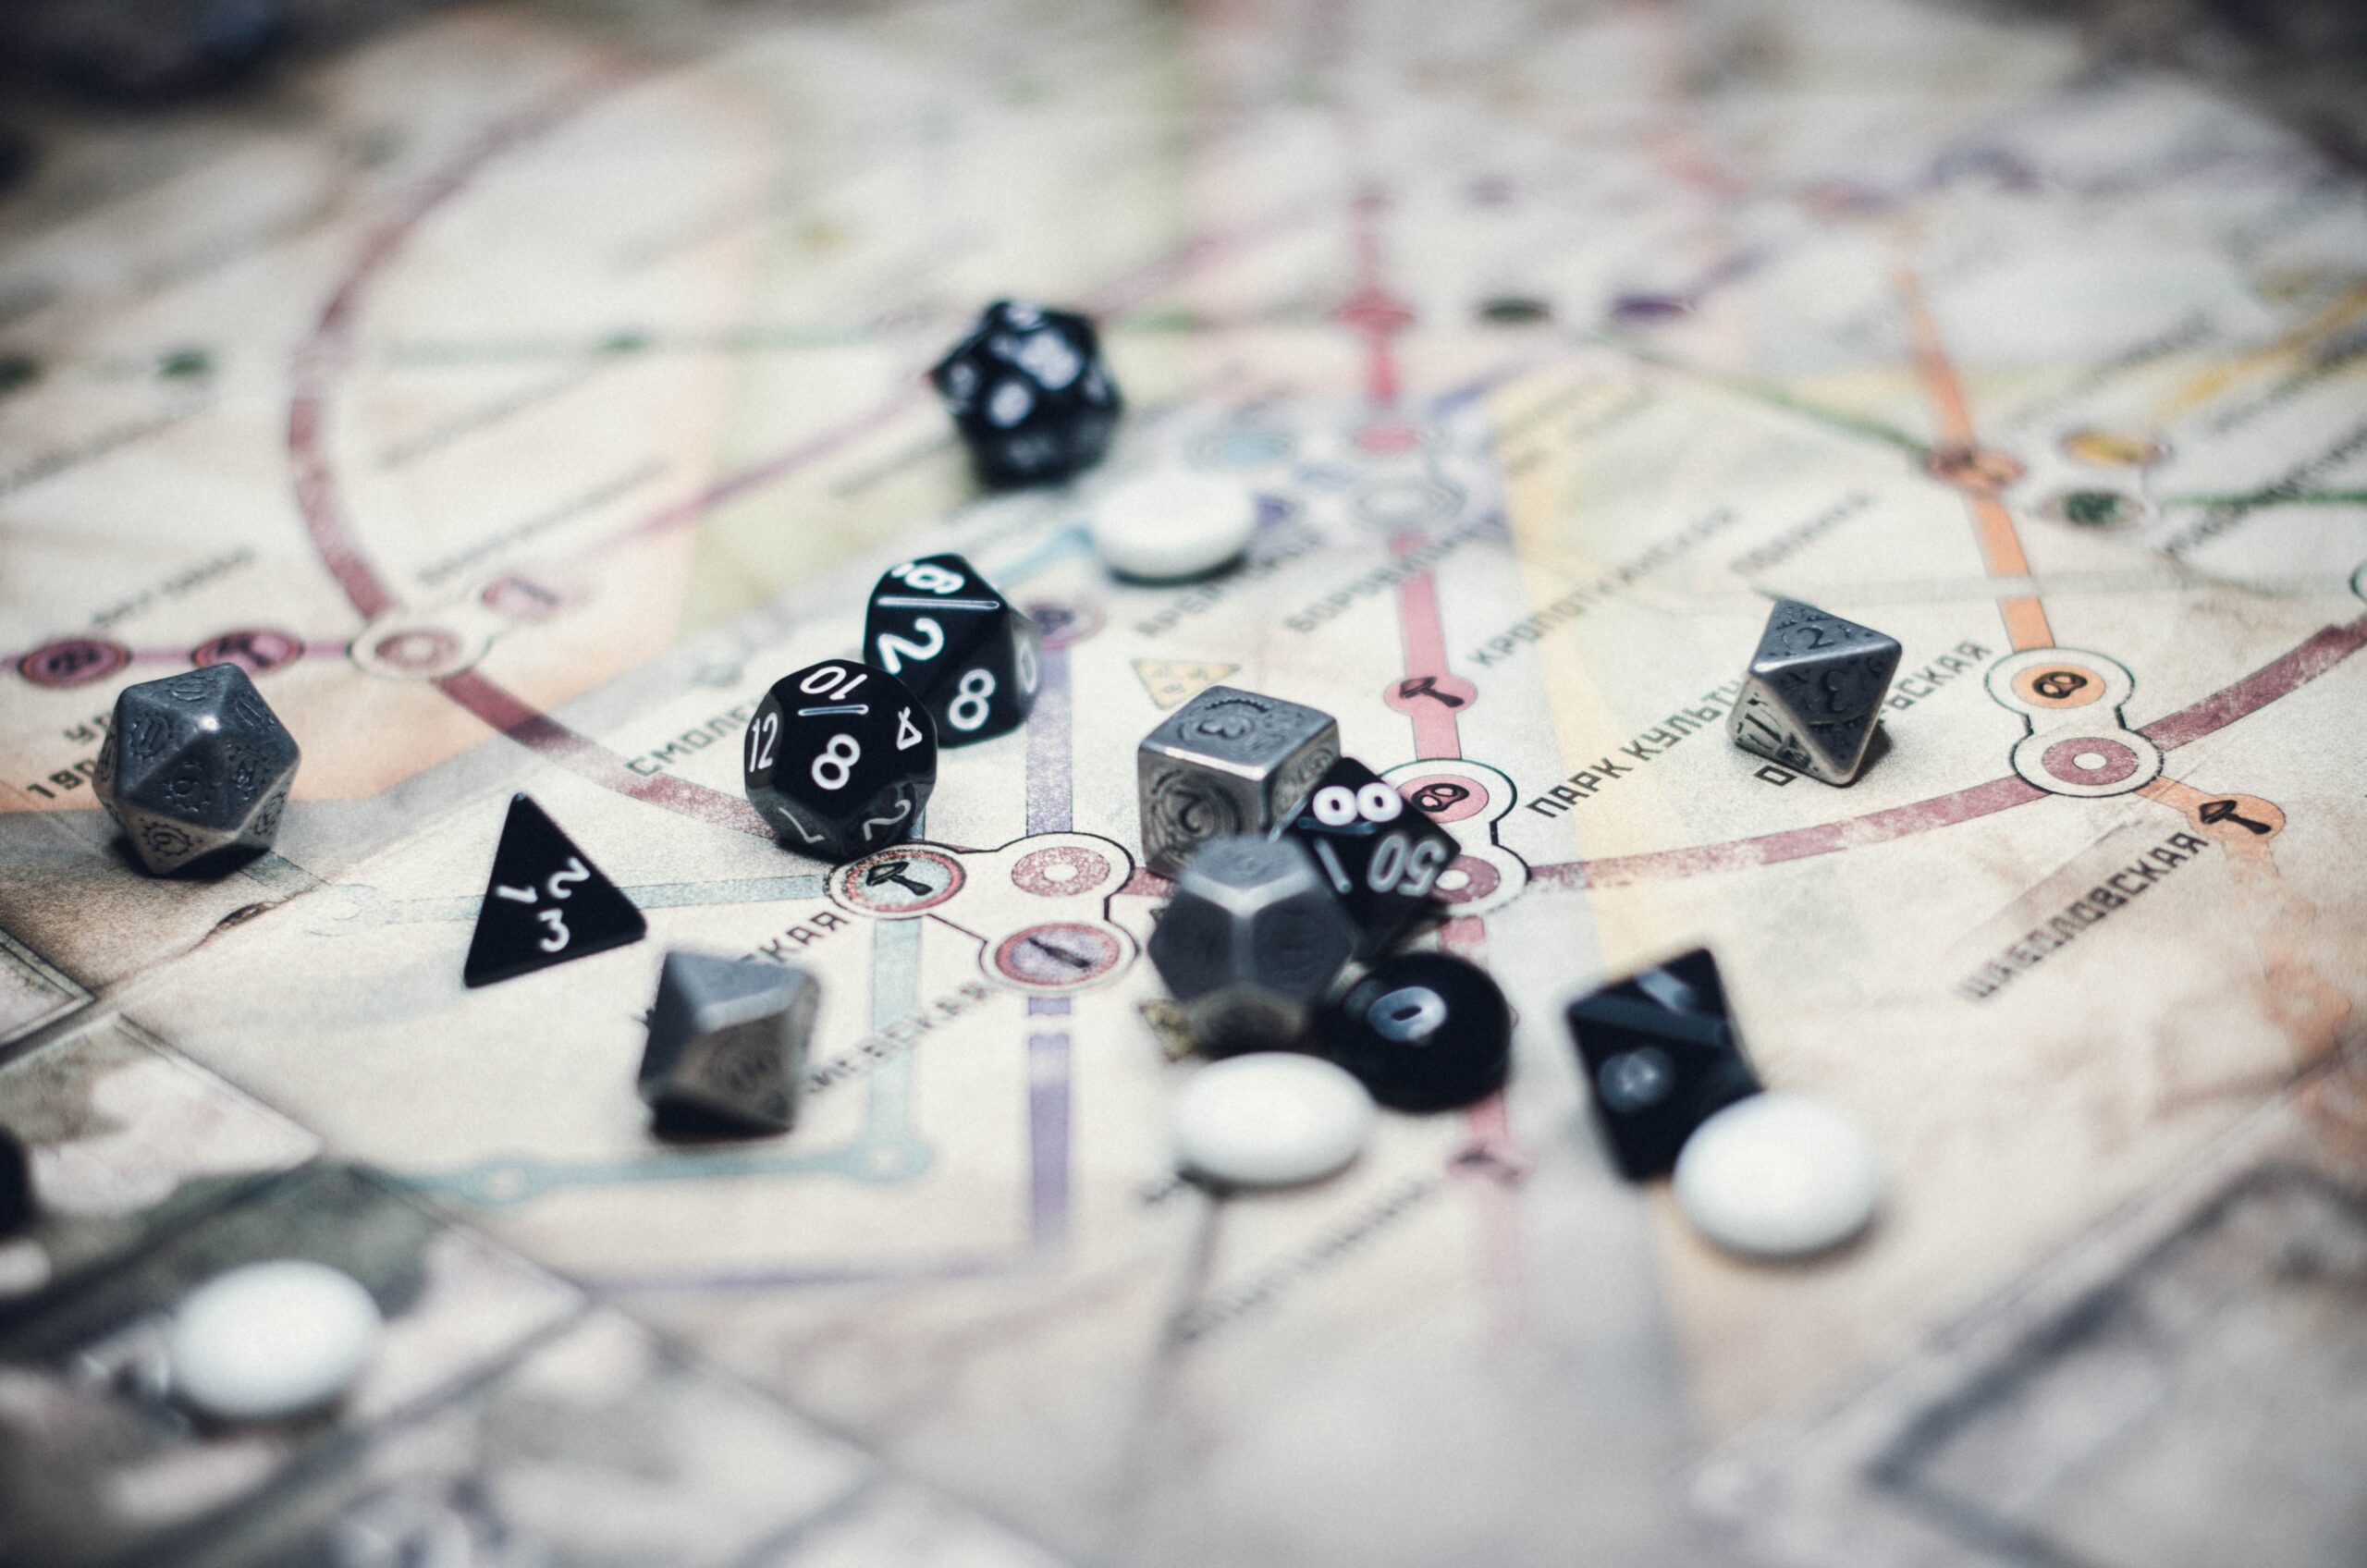 The Thrill of Publish: Taking Your Board Game Design from Prototype to Print